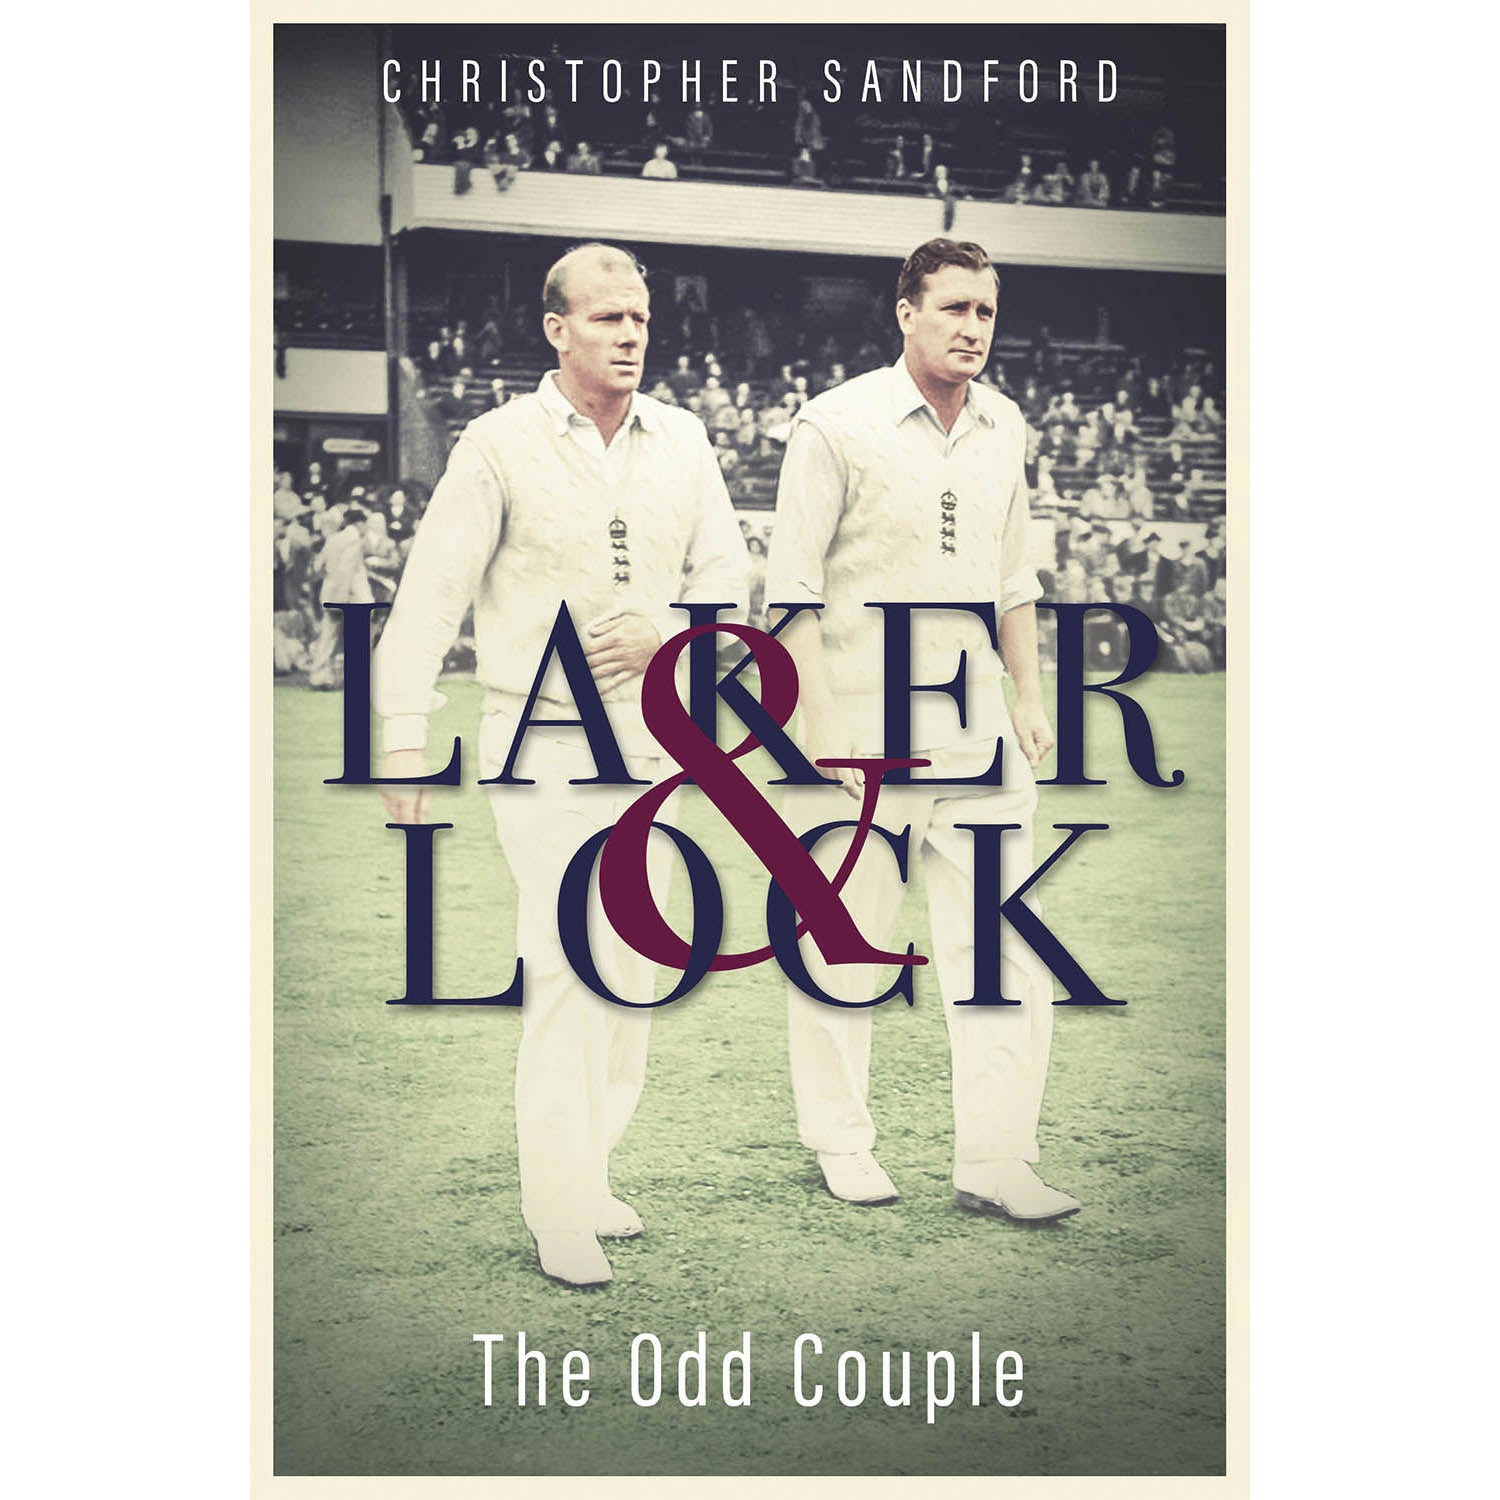 Laker and Lock – The Odd Couple